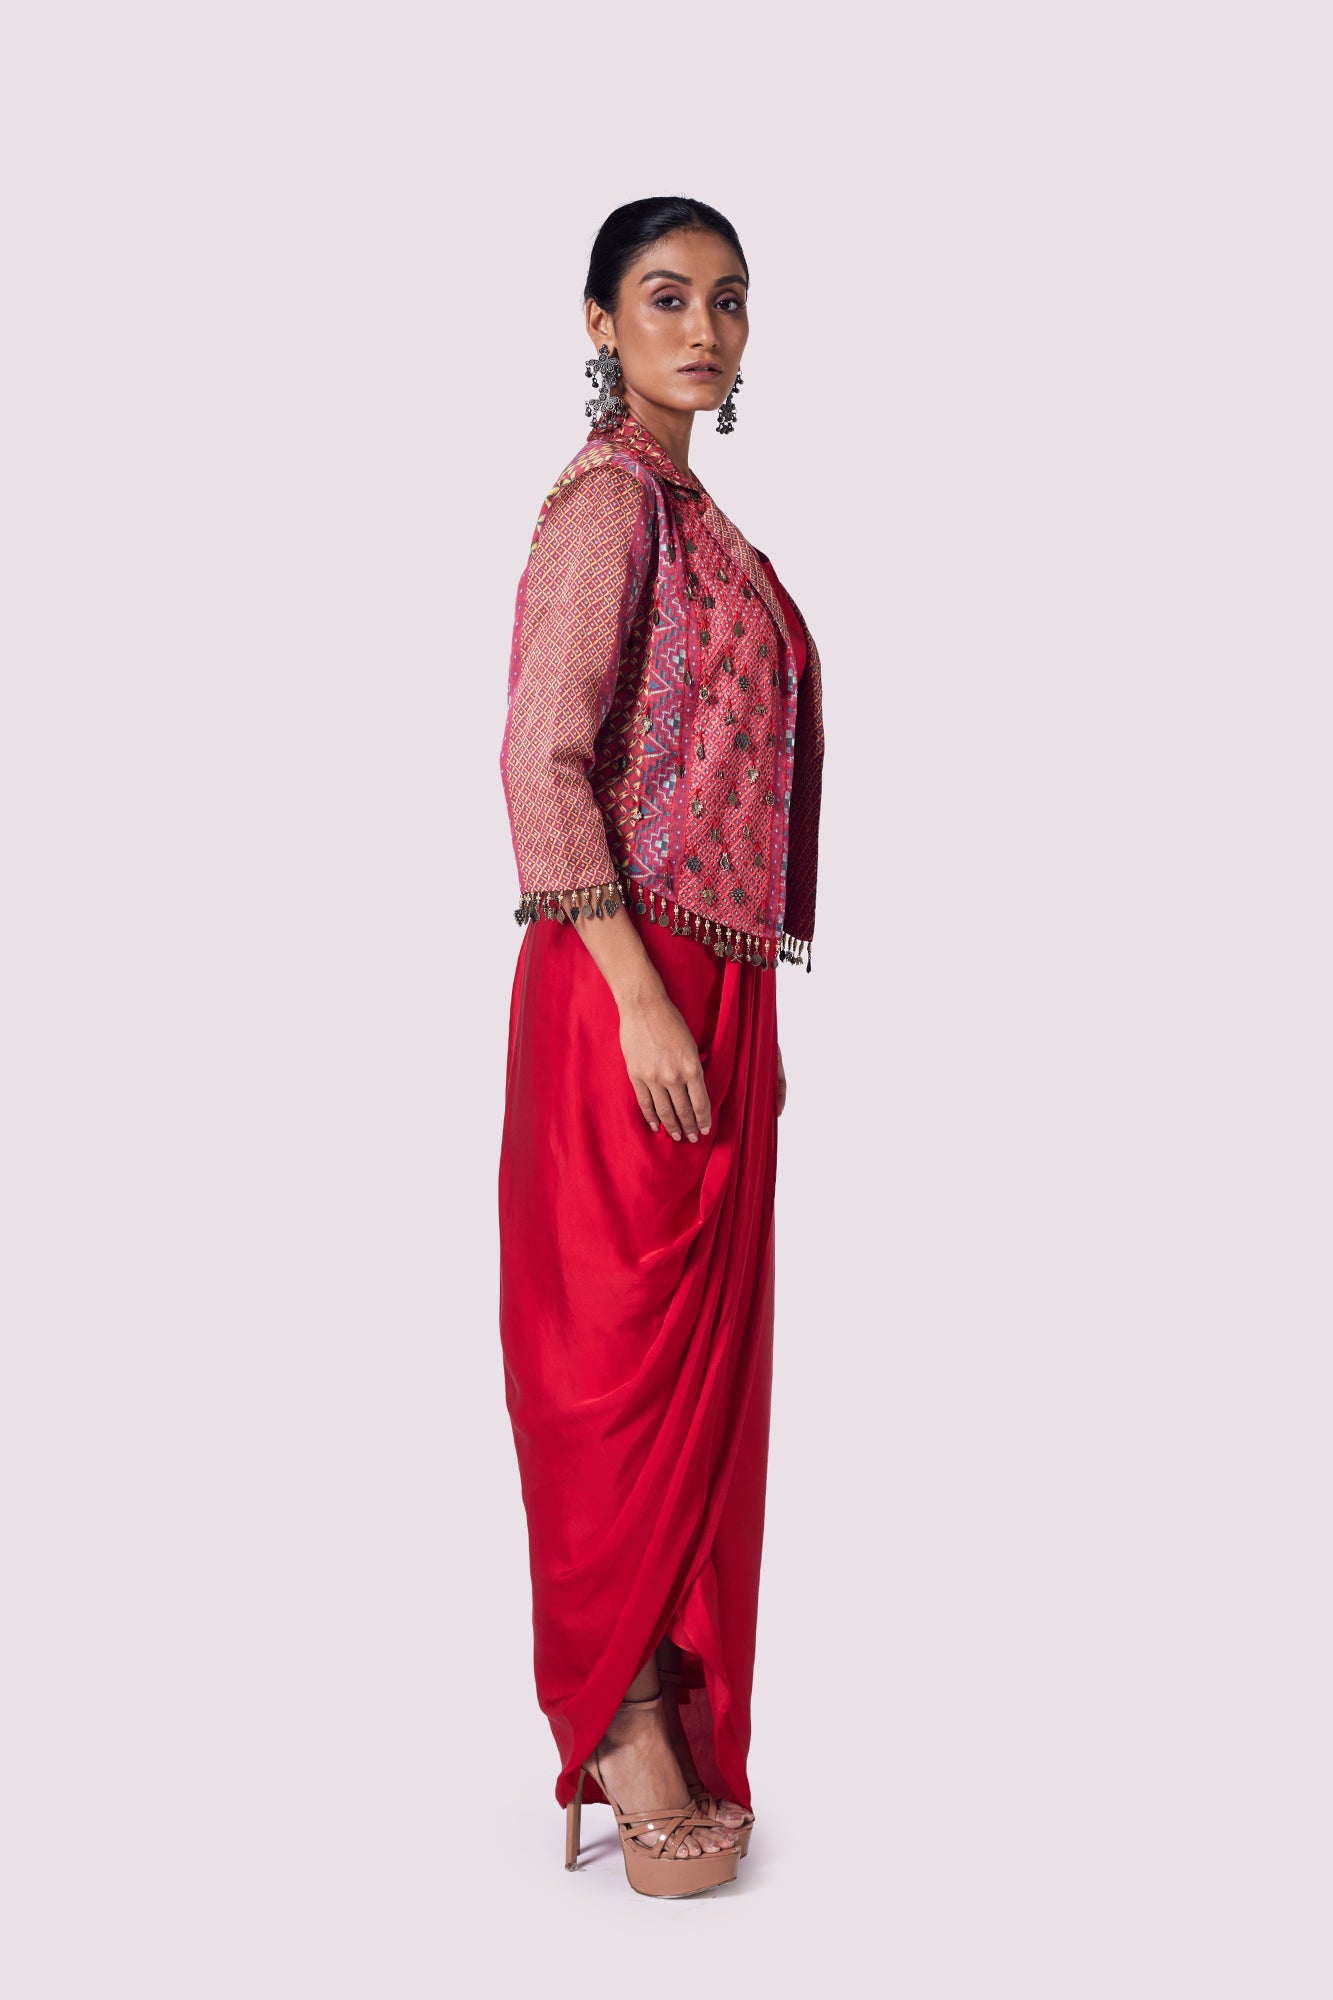 Buy red satin draped skirt with blouse online in USA and embroidered jacket. Shop the best and latest designs in embroidered sarees, designer sarees, Anarkali suit, lehengas, sharara suits for weddings and special occasions from Pure Elegance Indian fashion store in USA.-skirt